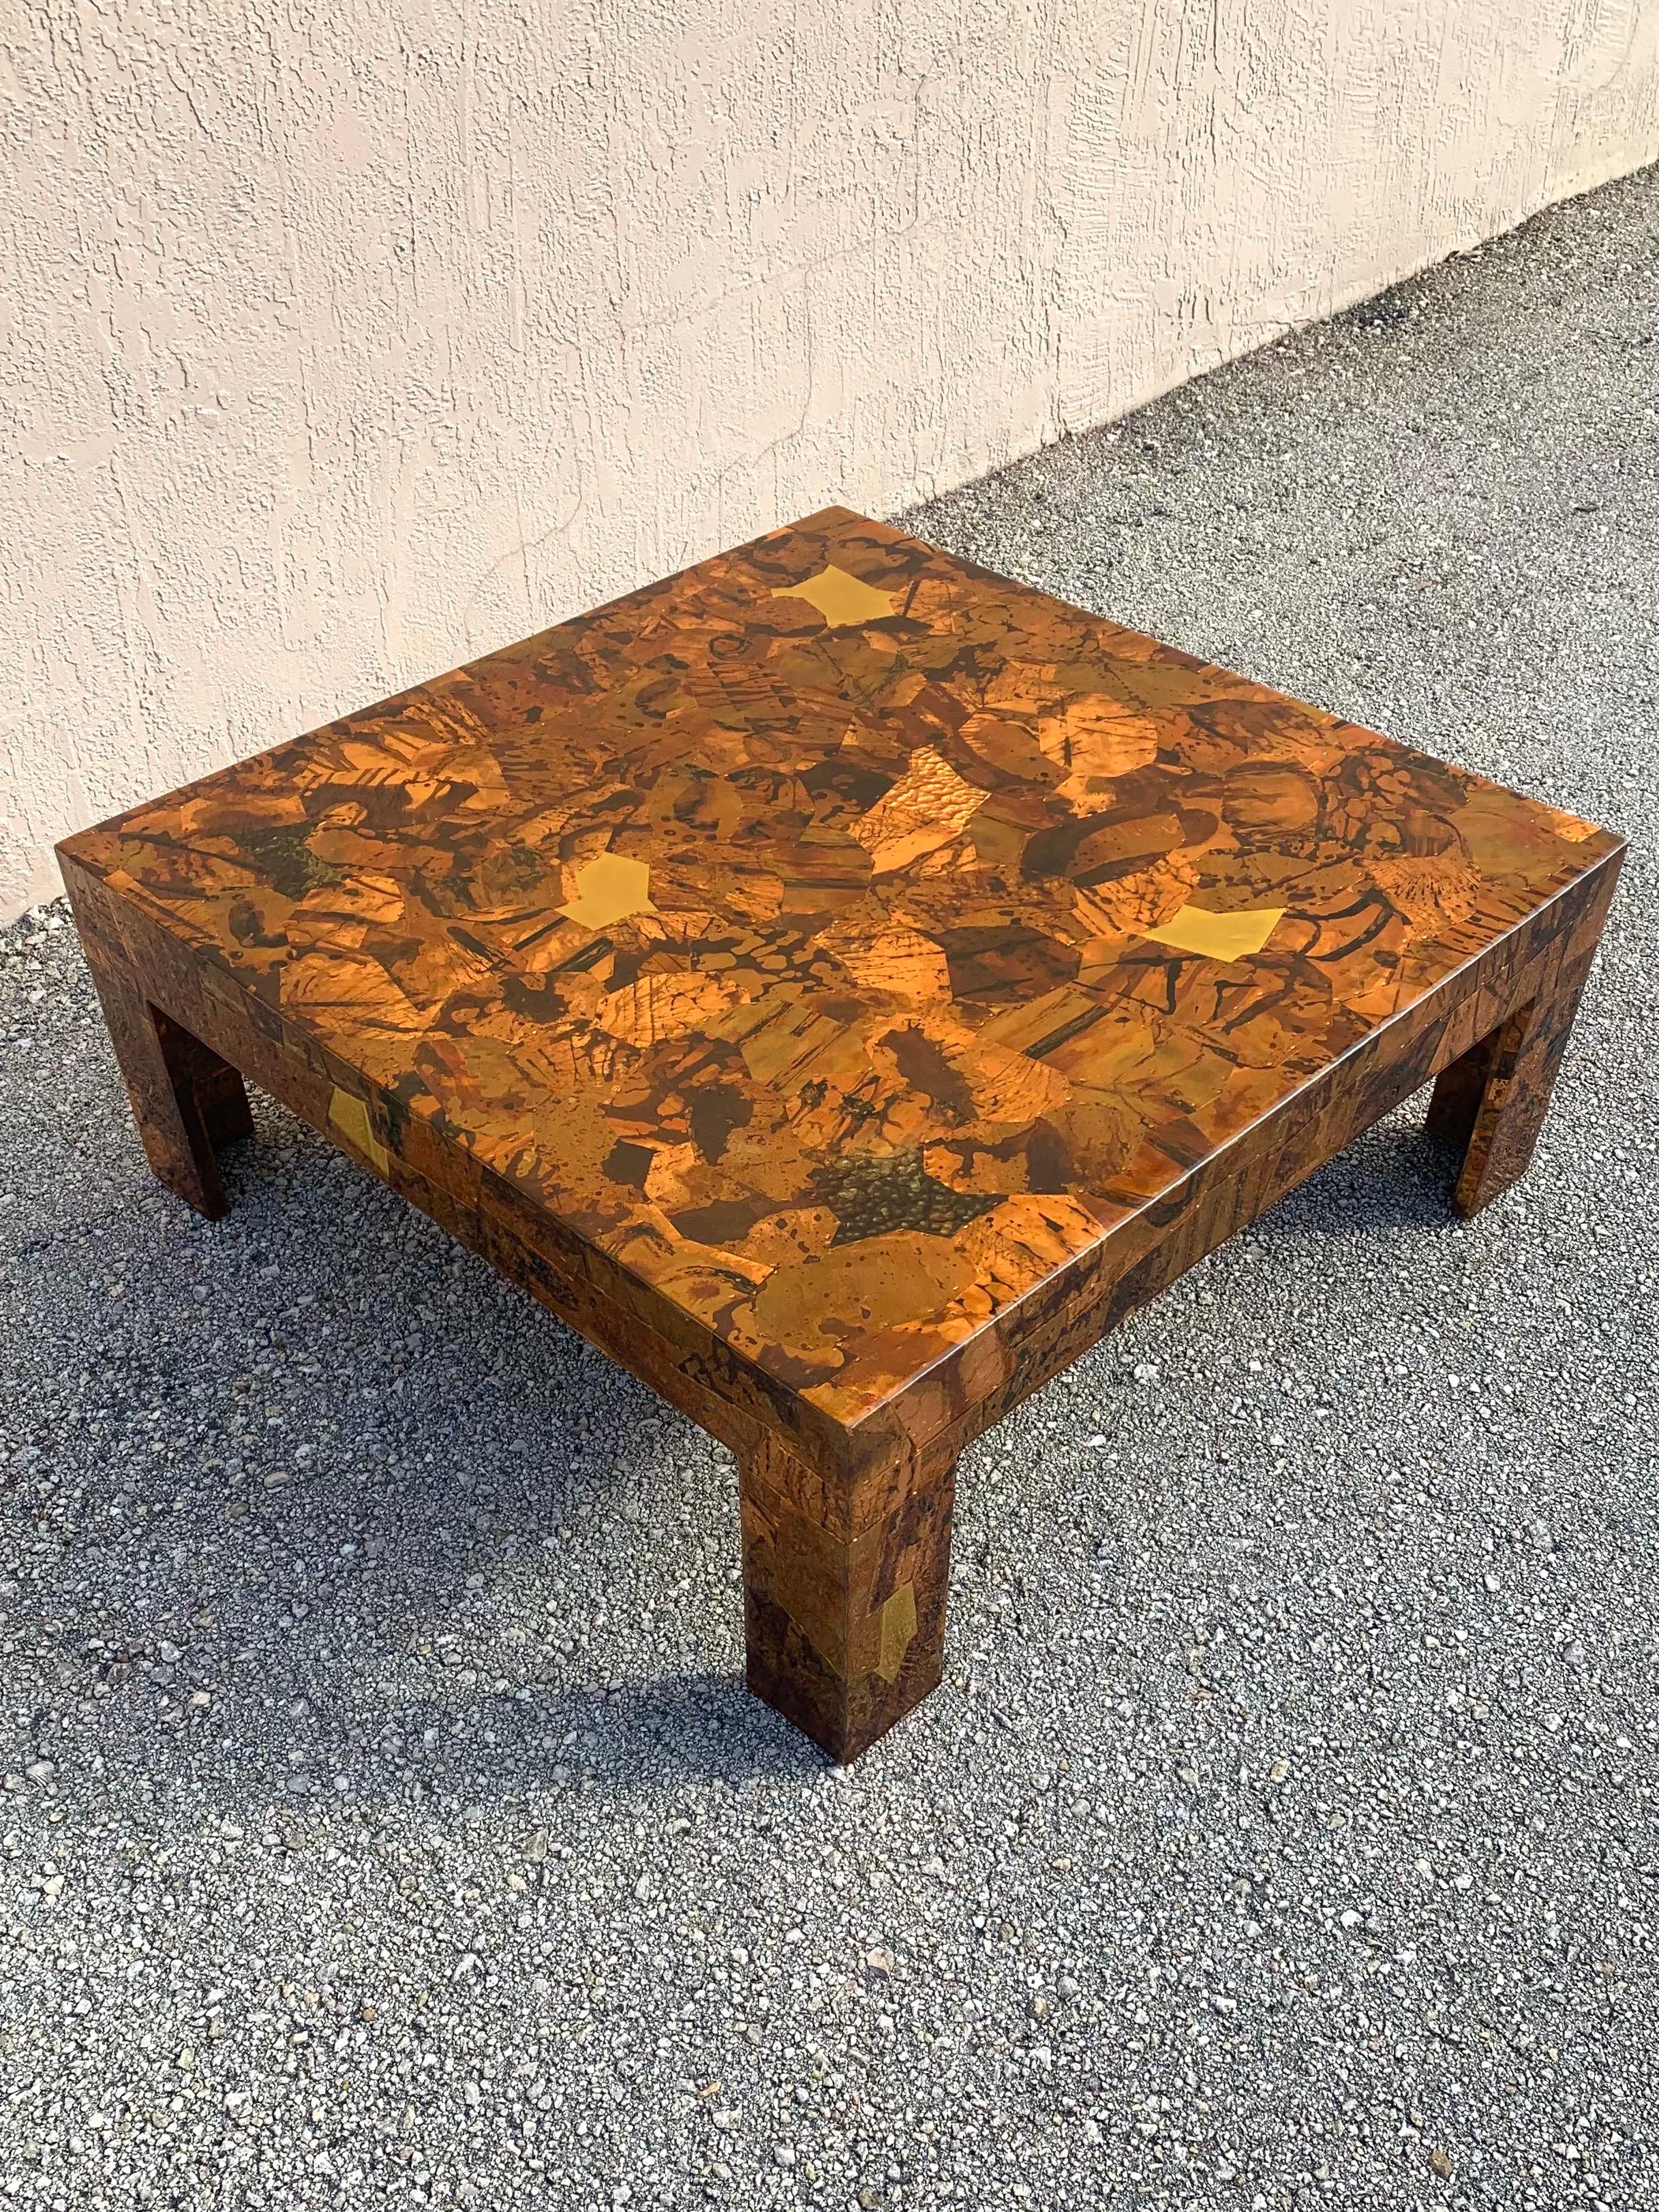 Studio made copper and brass coffee table. Made to have a brutalist flair the artist used different pieces of textured and patinated copper and clean brass to cover the entire coffee table. The plates are affixed with copper staples then covered